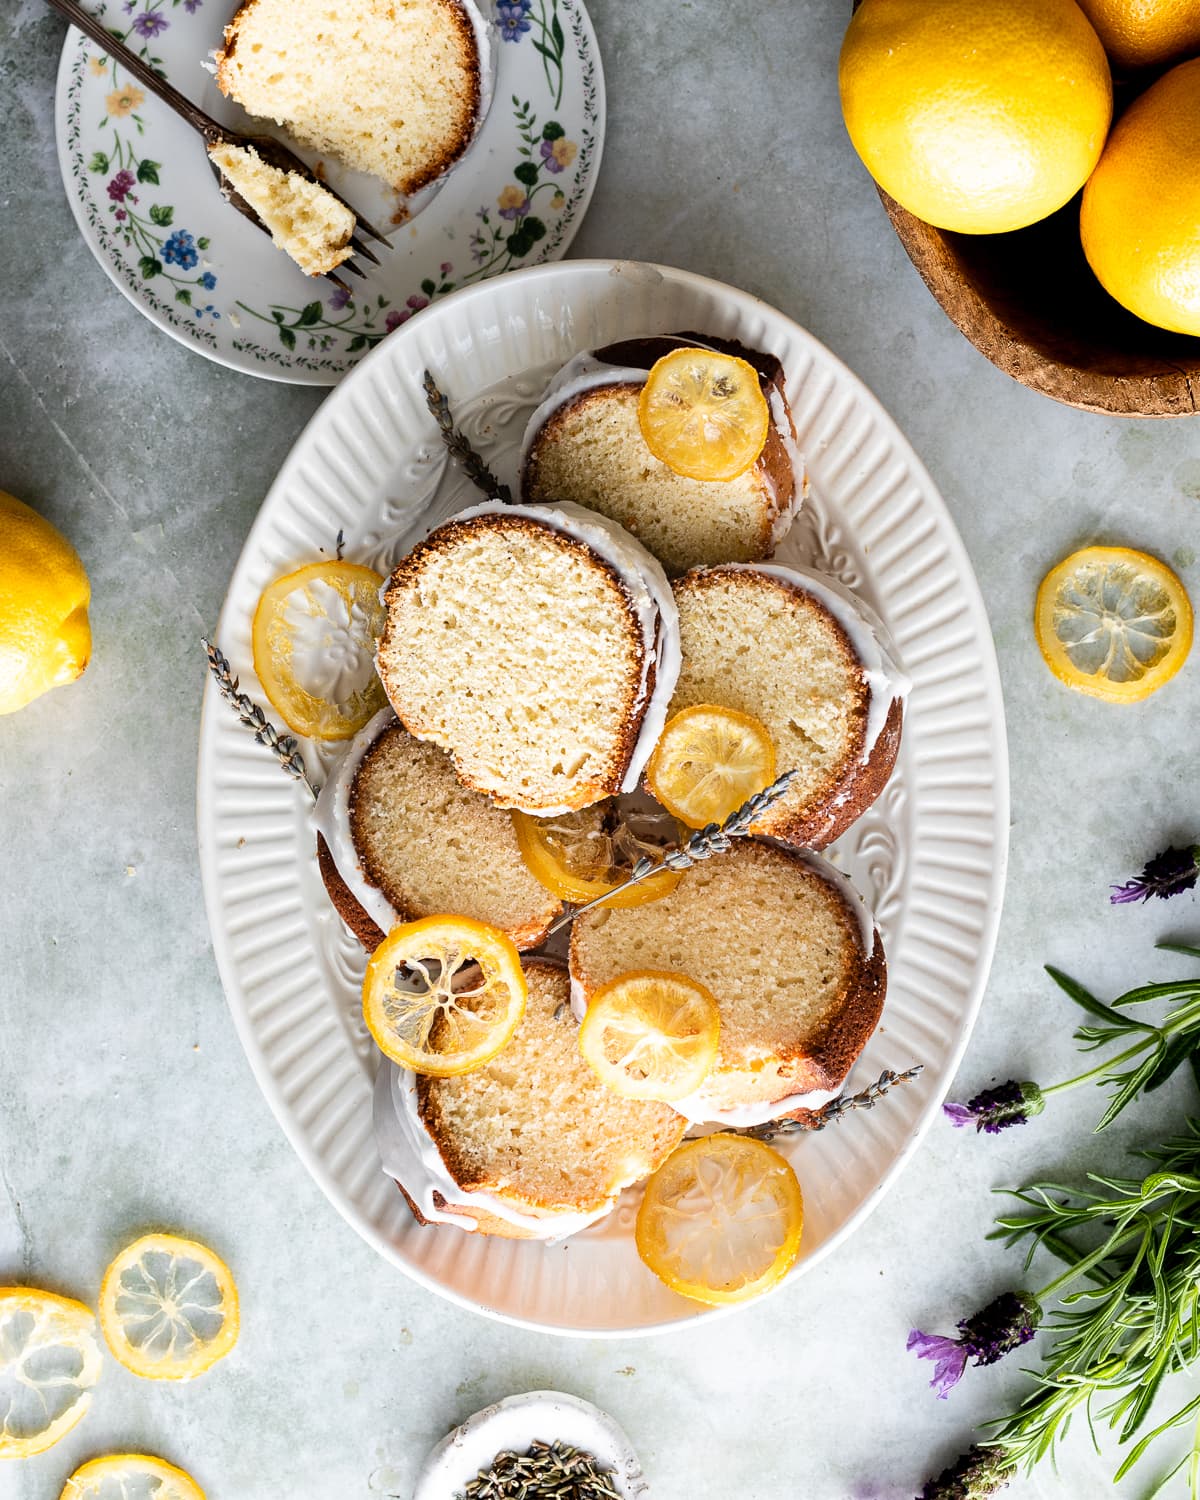 oval platter with glazed bundt cake slices topped with lavender and candied lemon slices